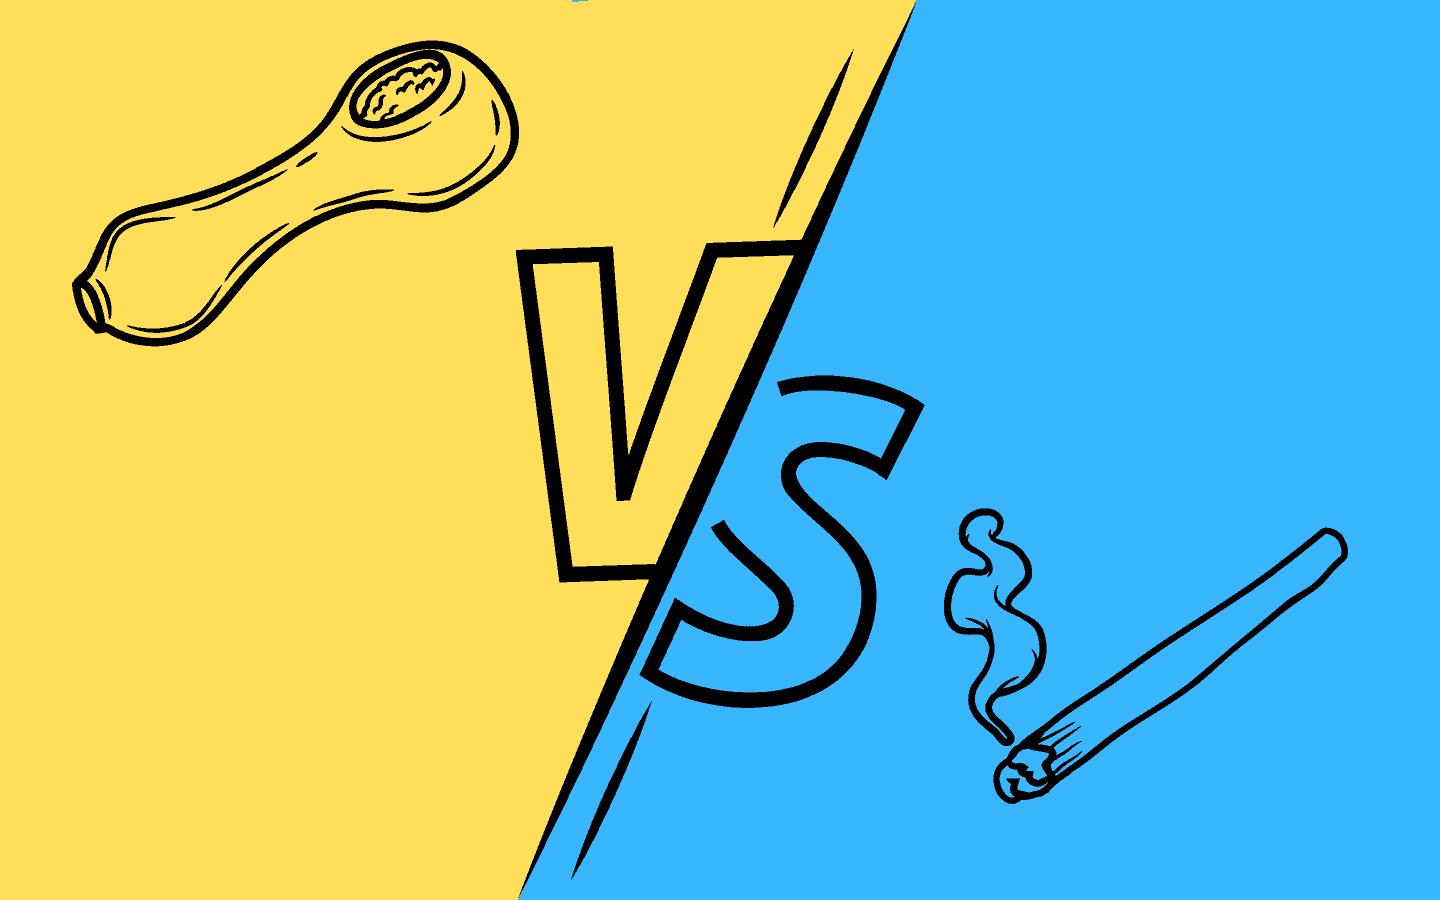 smoked a bowl - Why smoking a bowl is better